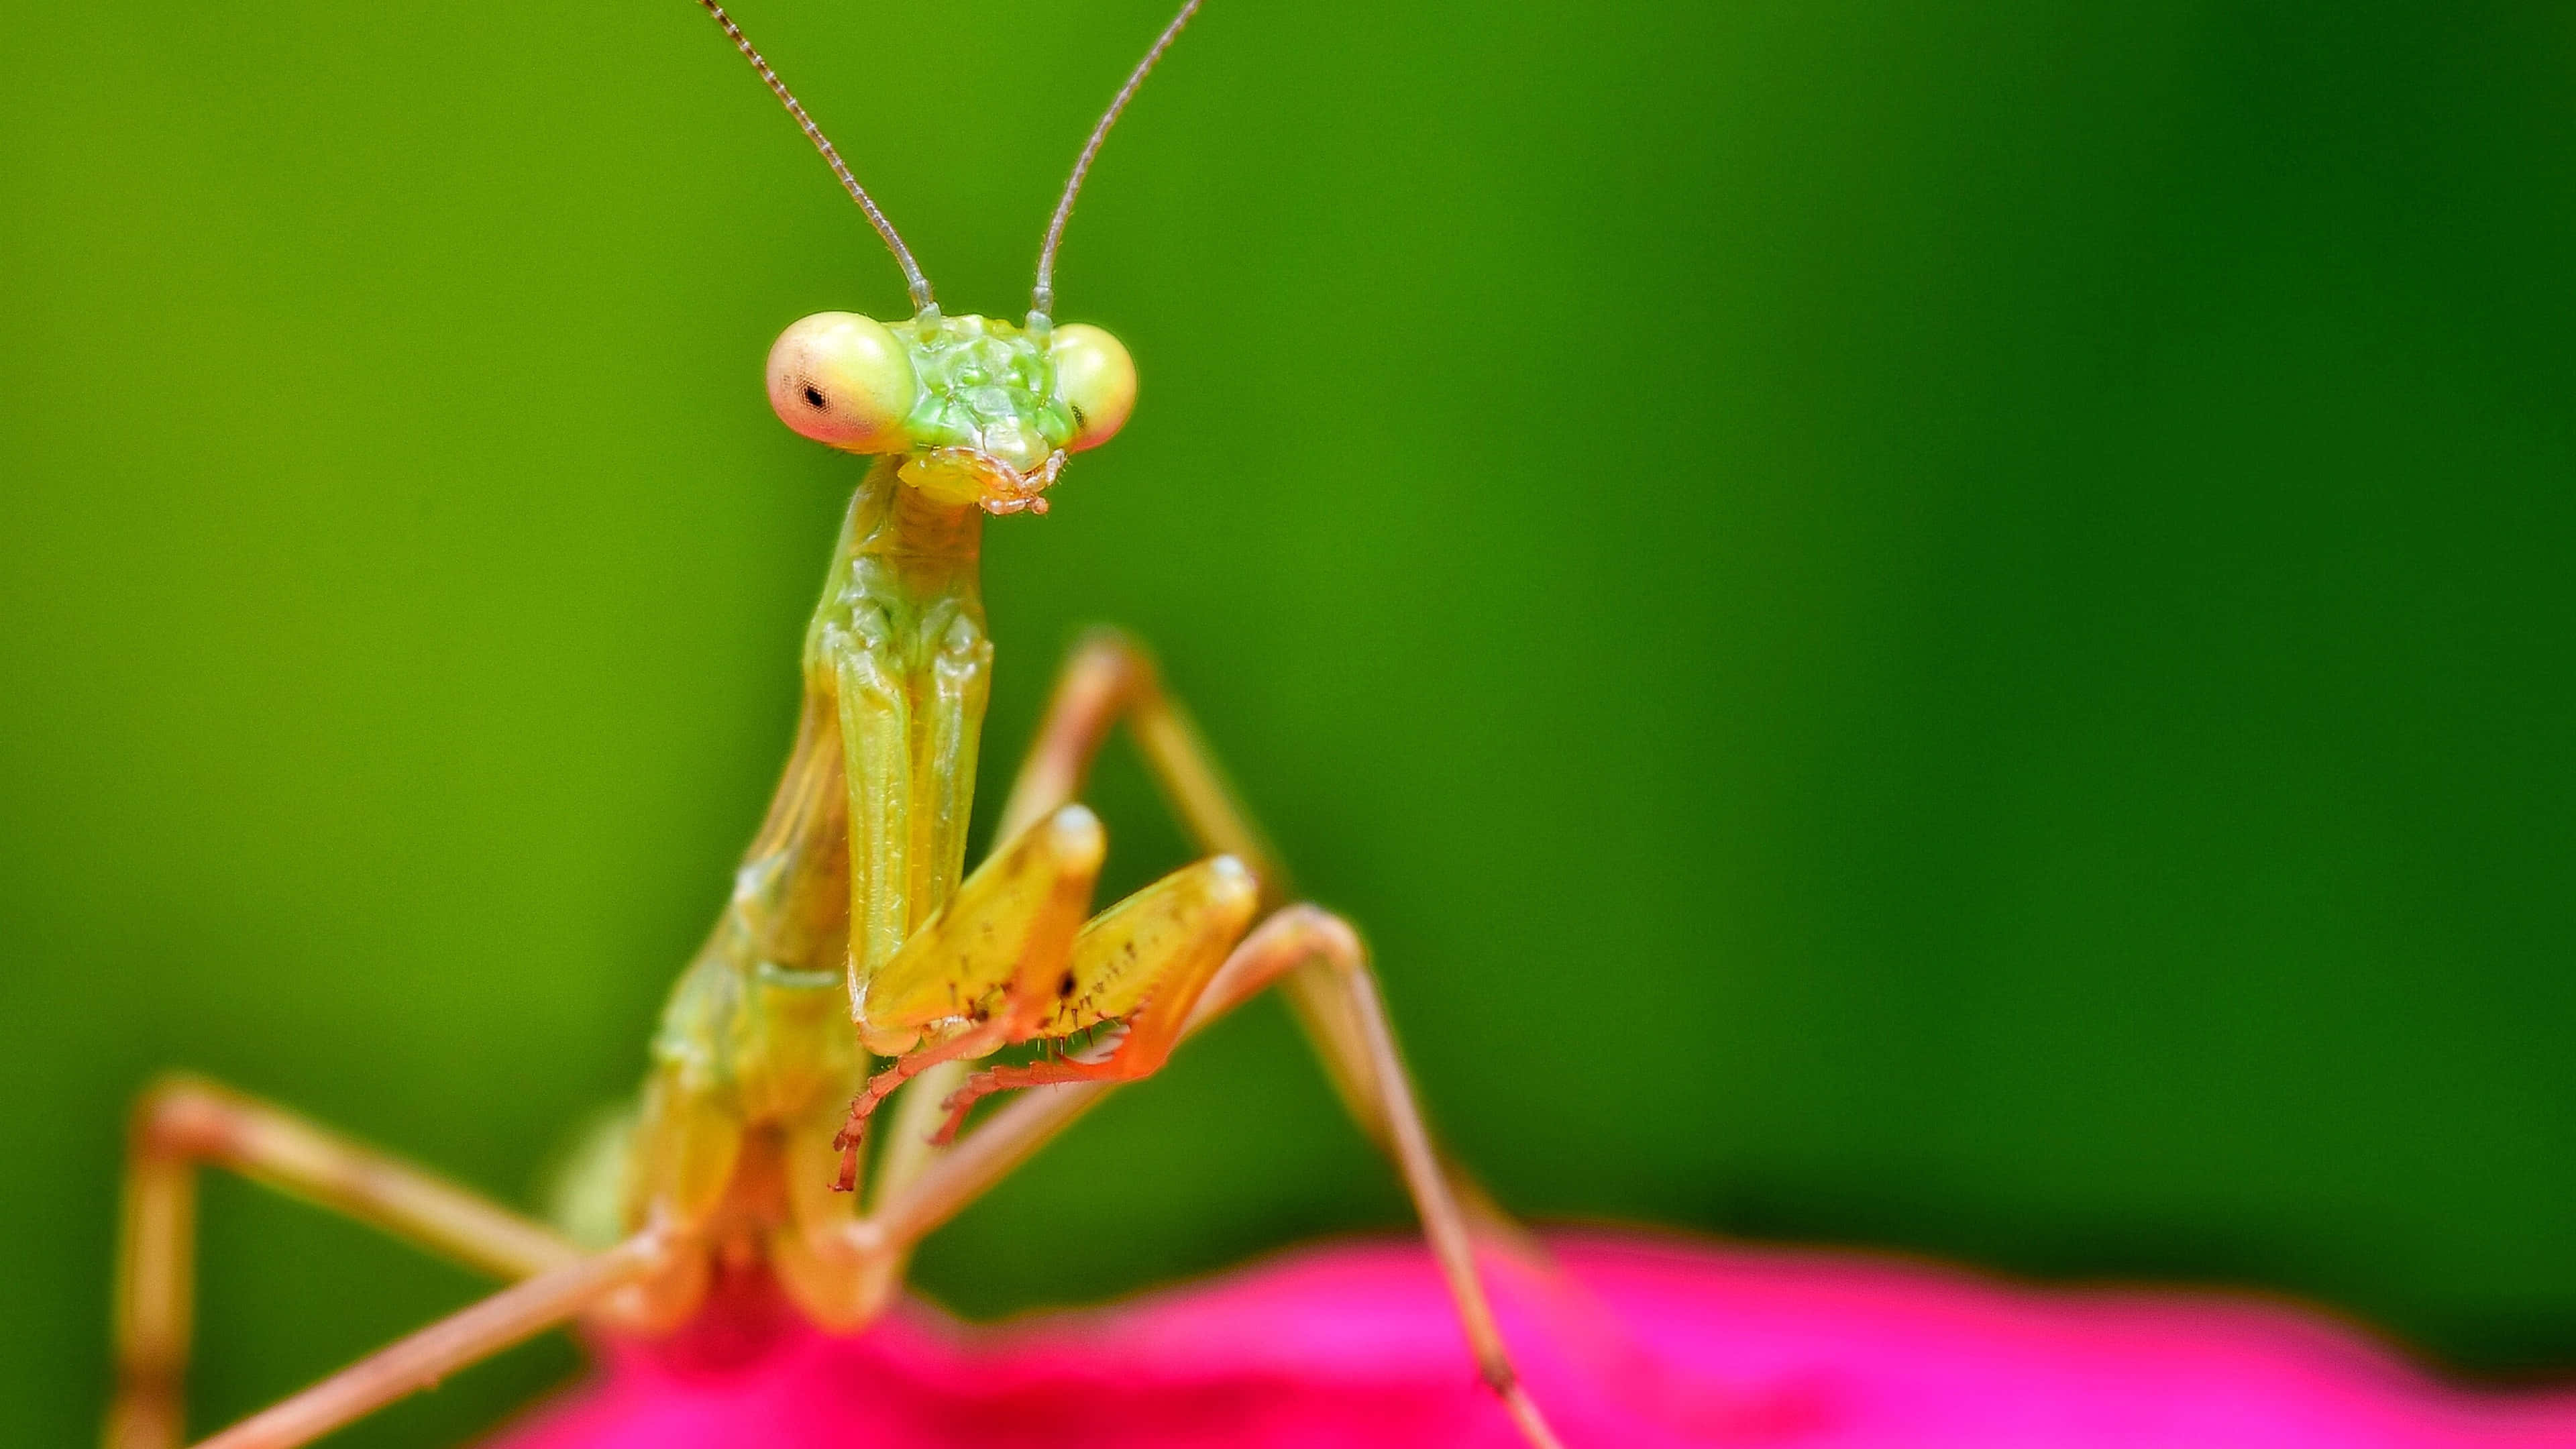 Captivating Macro Shot Of A Vibrant Insect In 4k Resolution Wallpaper